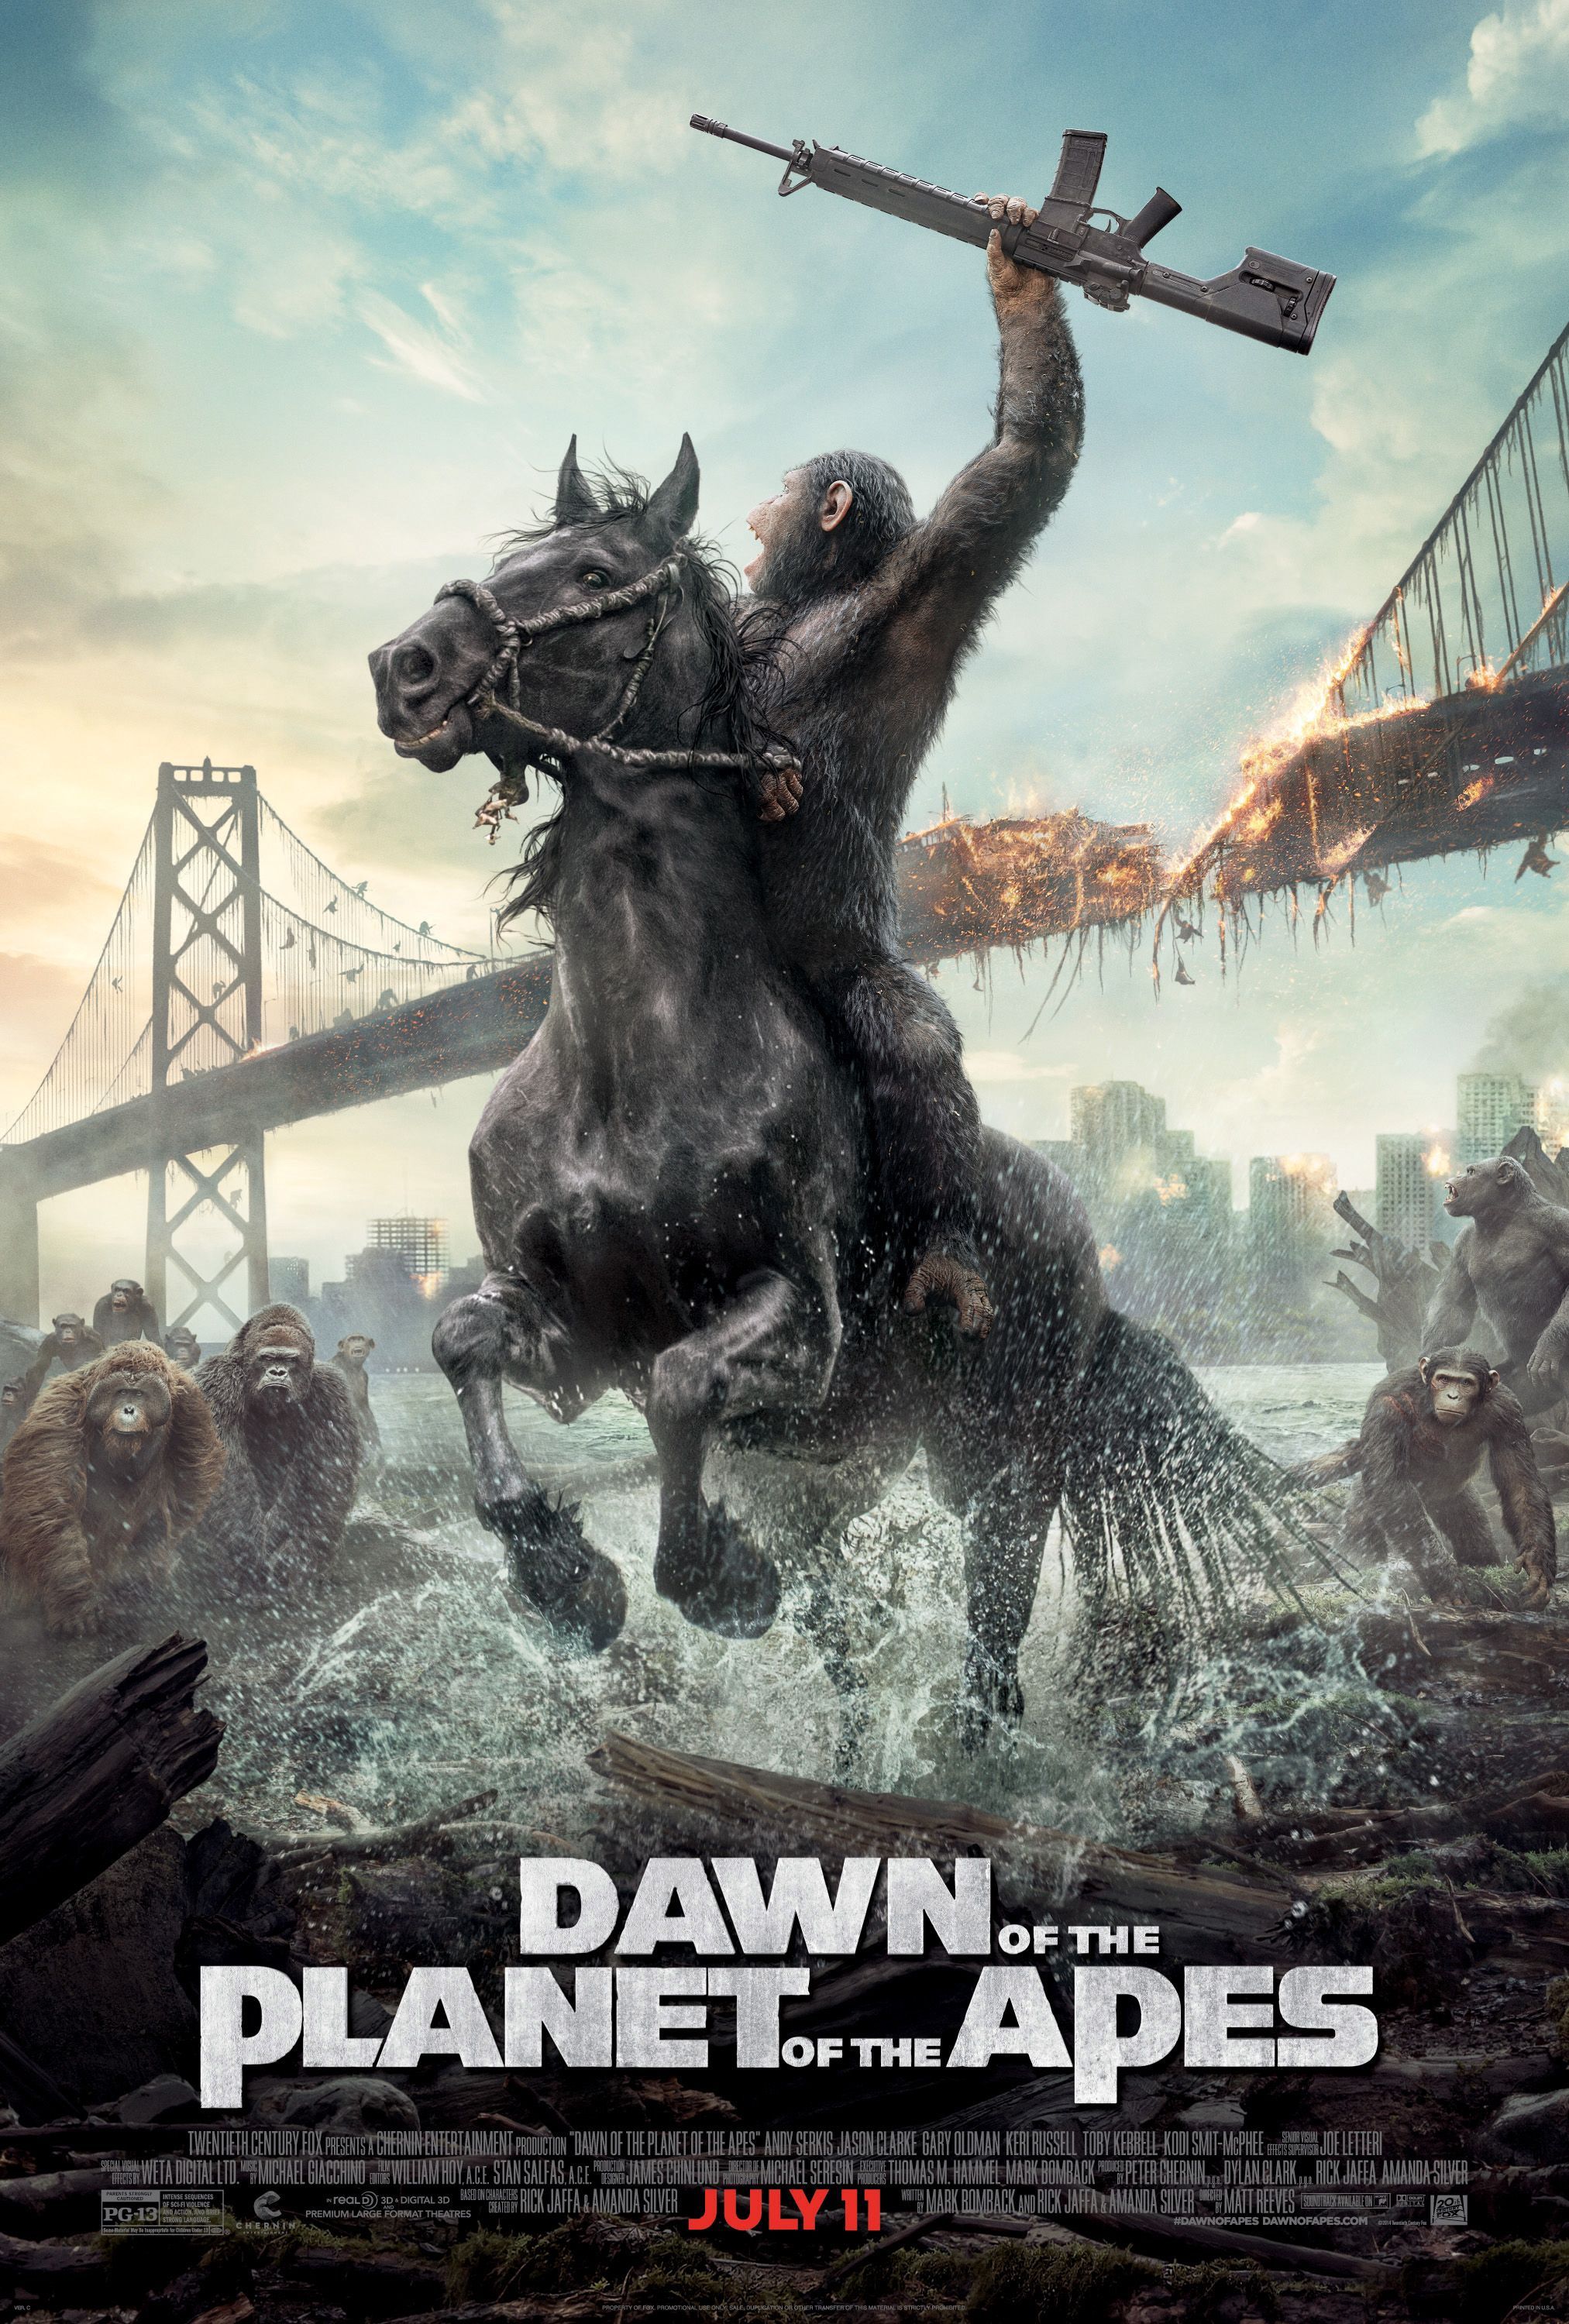 Dawn of the Planet of the Apes (2017) Hindi Dubbed Full Movie